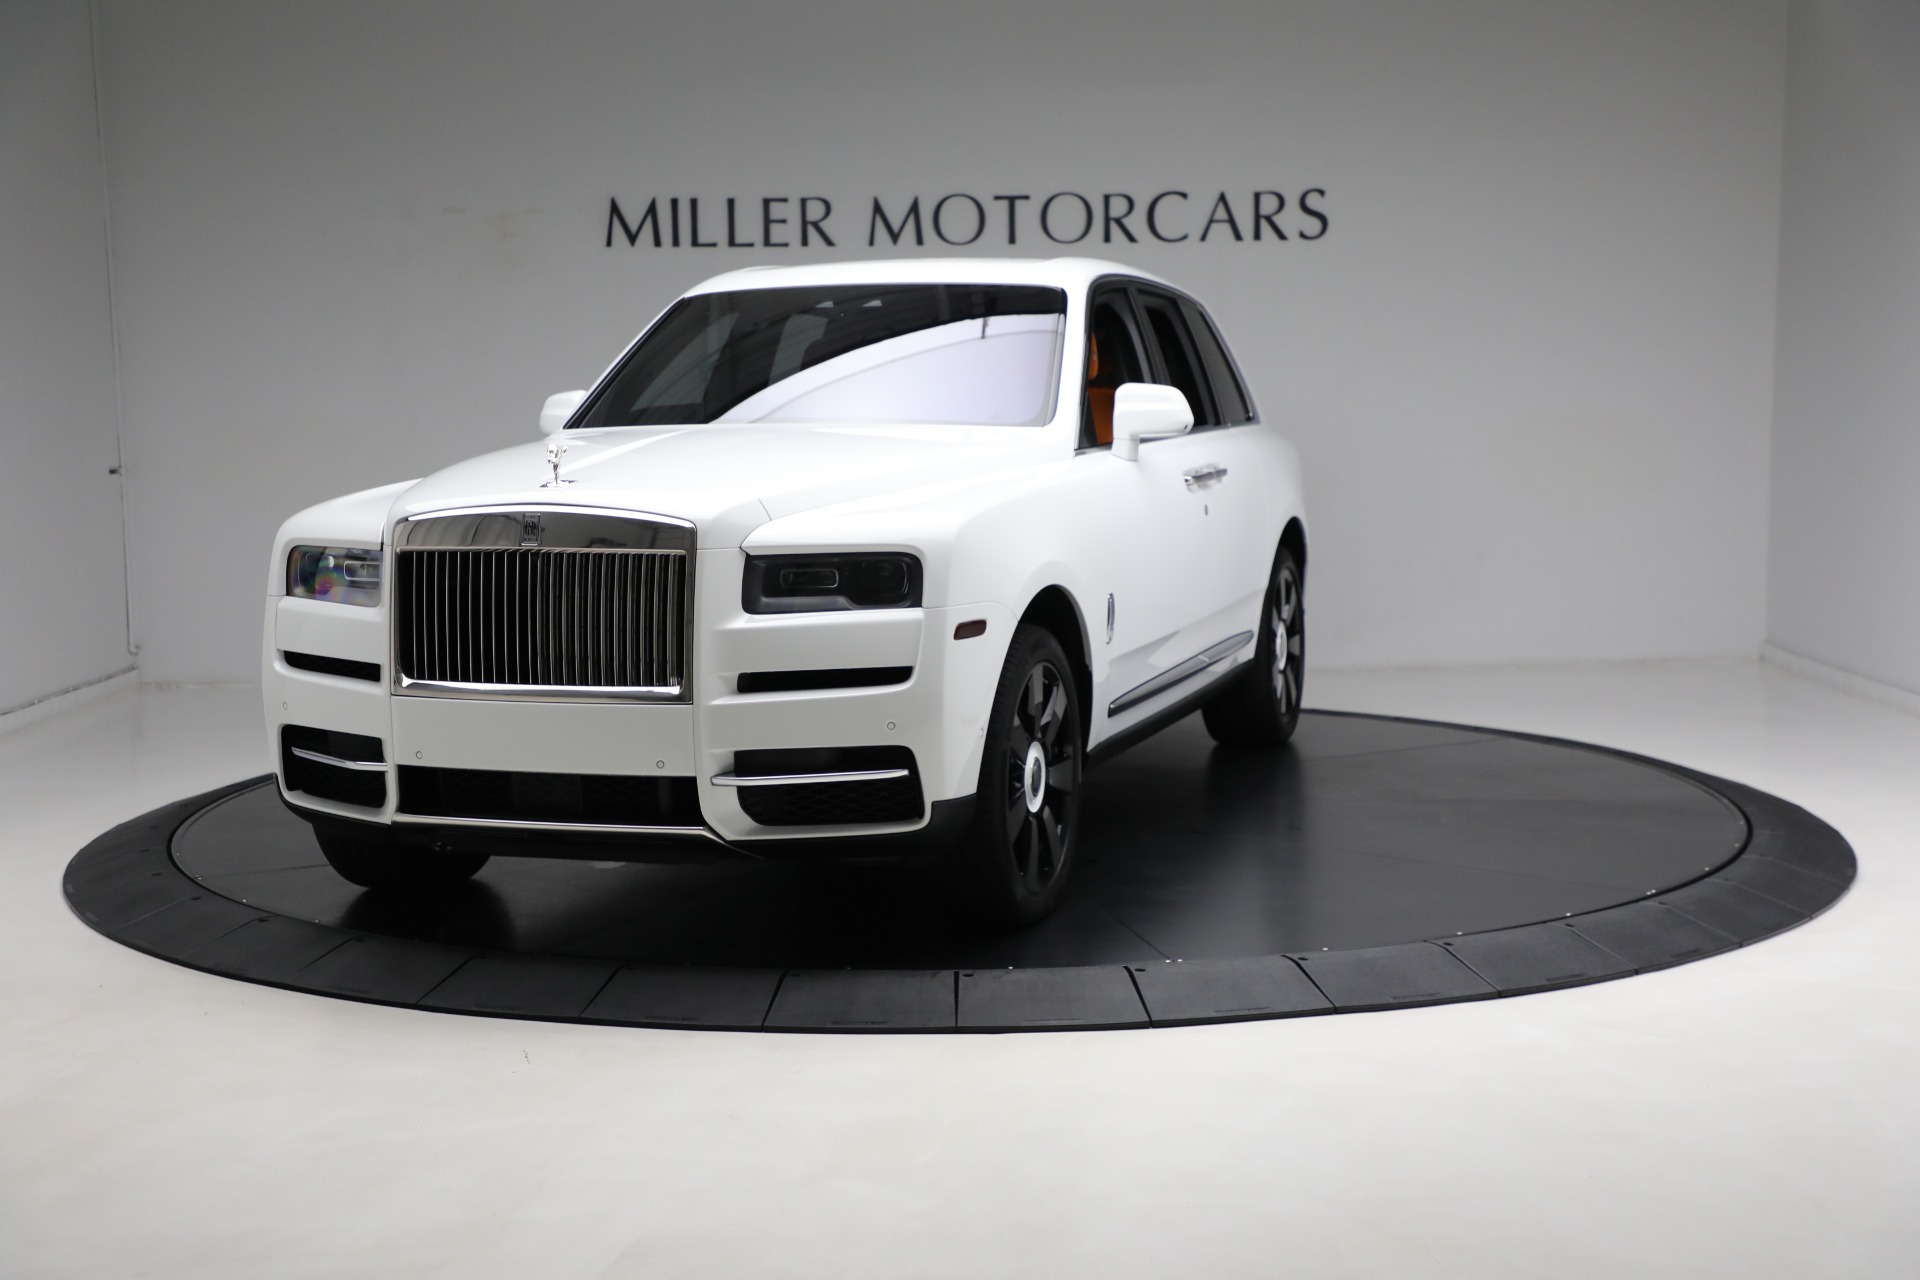 Used 2022 Rolls-Royce Cullinan for sale $345,900 at Aston Martin of Greenwich in Greenwich CT 06830 1